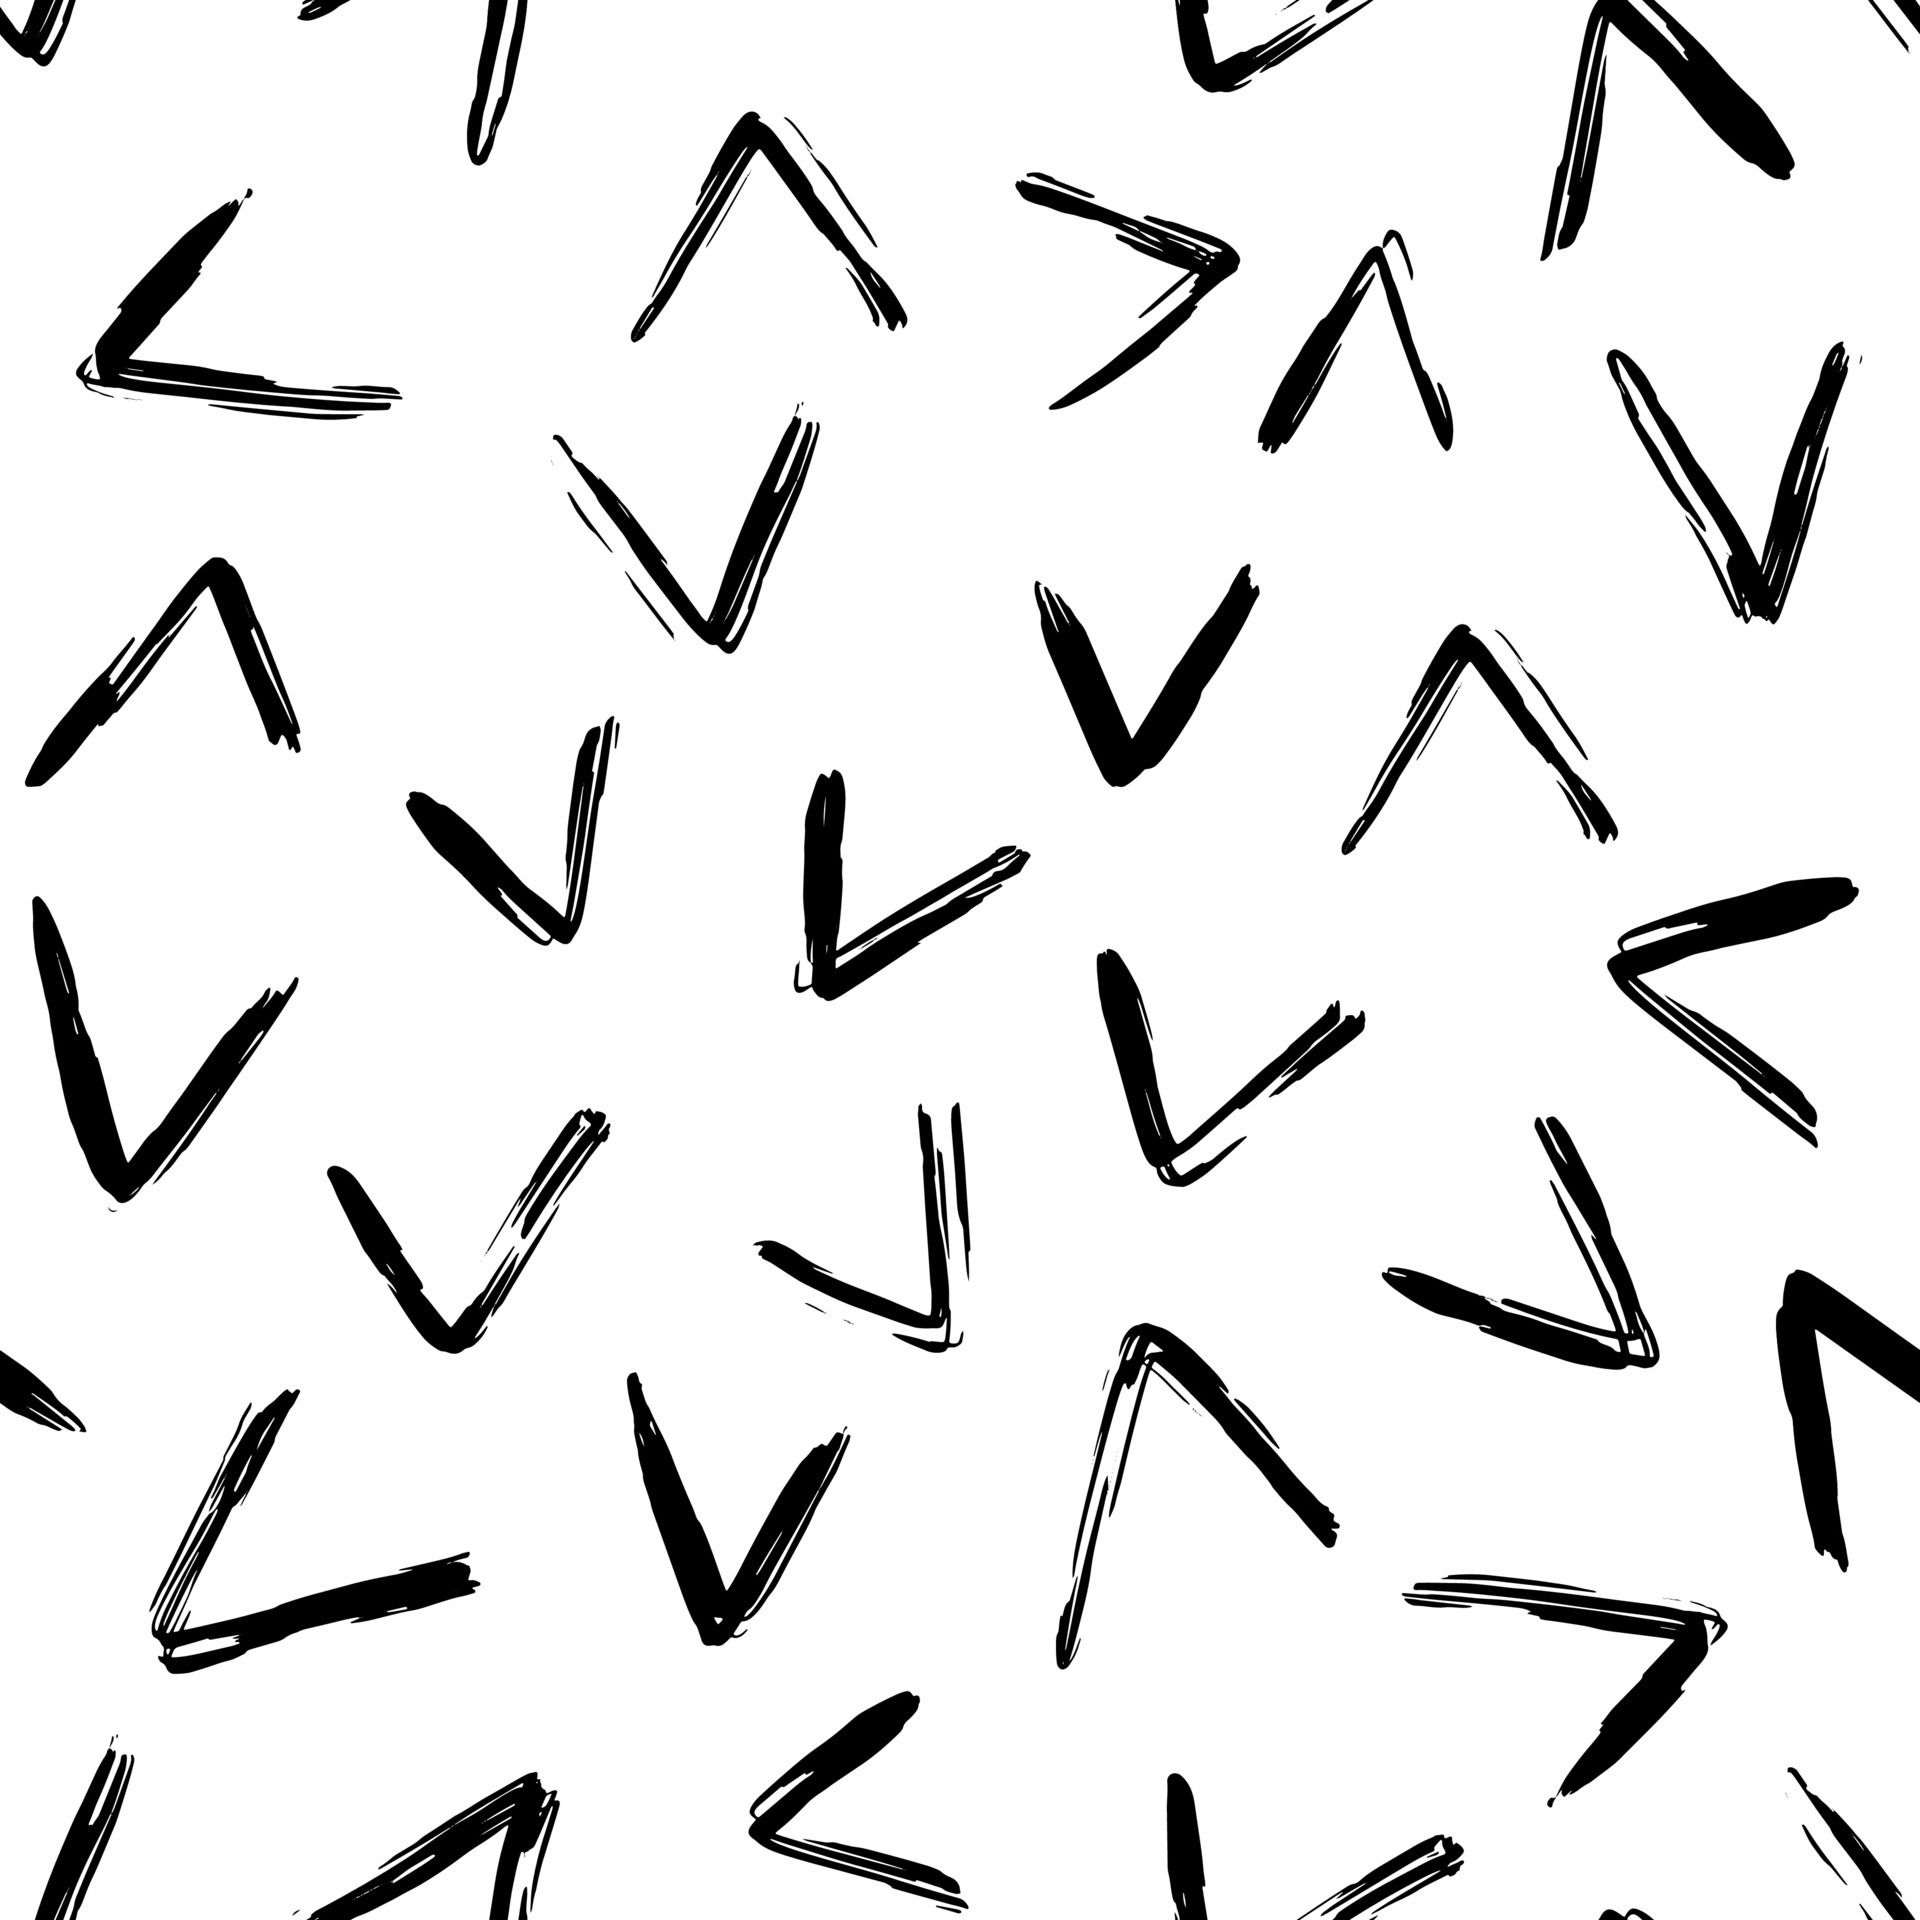  Bürste Hintergrundbild 1920x1920. Aesthetic Contemporary printable seamless pattern with abstract line, dot, shape brush stroke in black and white colors. Boho background in minimalist style vector Illustration for wallpaper fabric